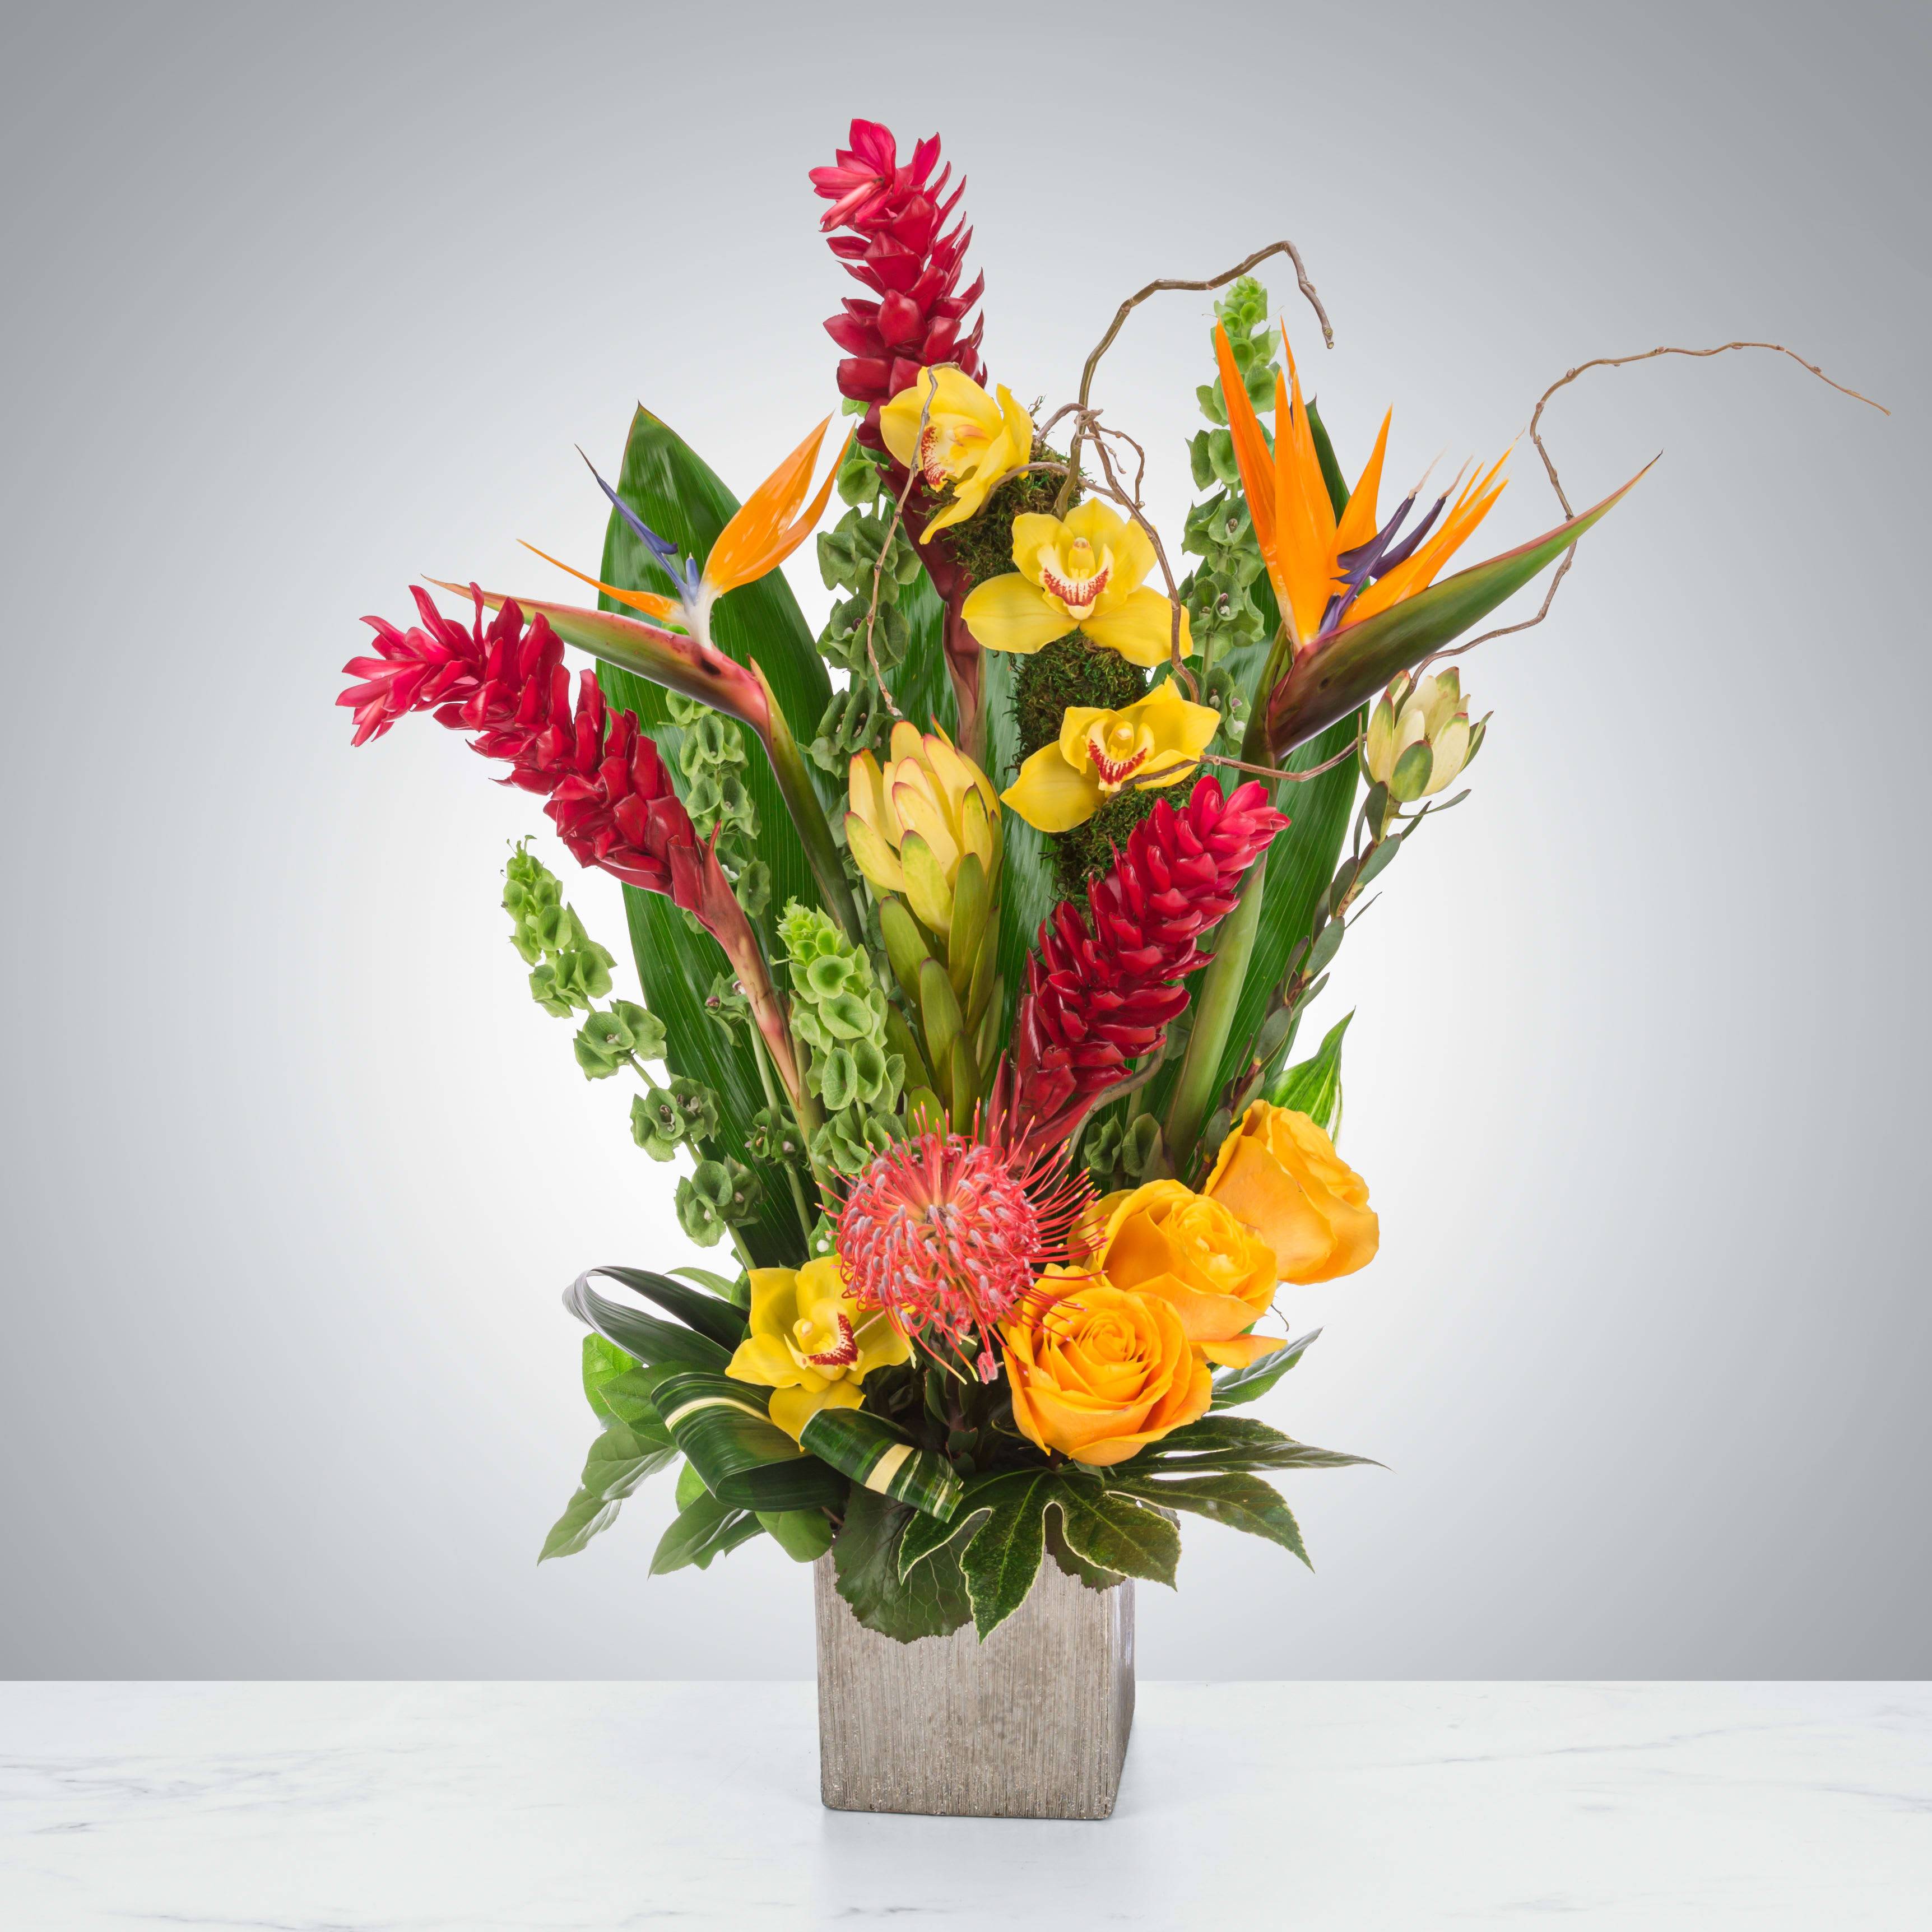 Tropic Like It's Hot - Tropical plants come together in this one-sided tall standing arrangement. Featuring birds of paradise, ginger, and pincushion protea, this tropical selection would look lovely in any home.  Approximate Dimensions: 22&quot;D x 30&quot;H